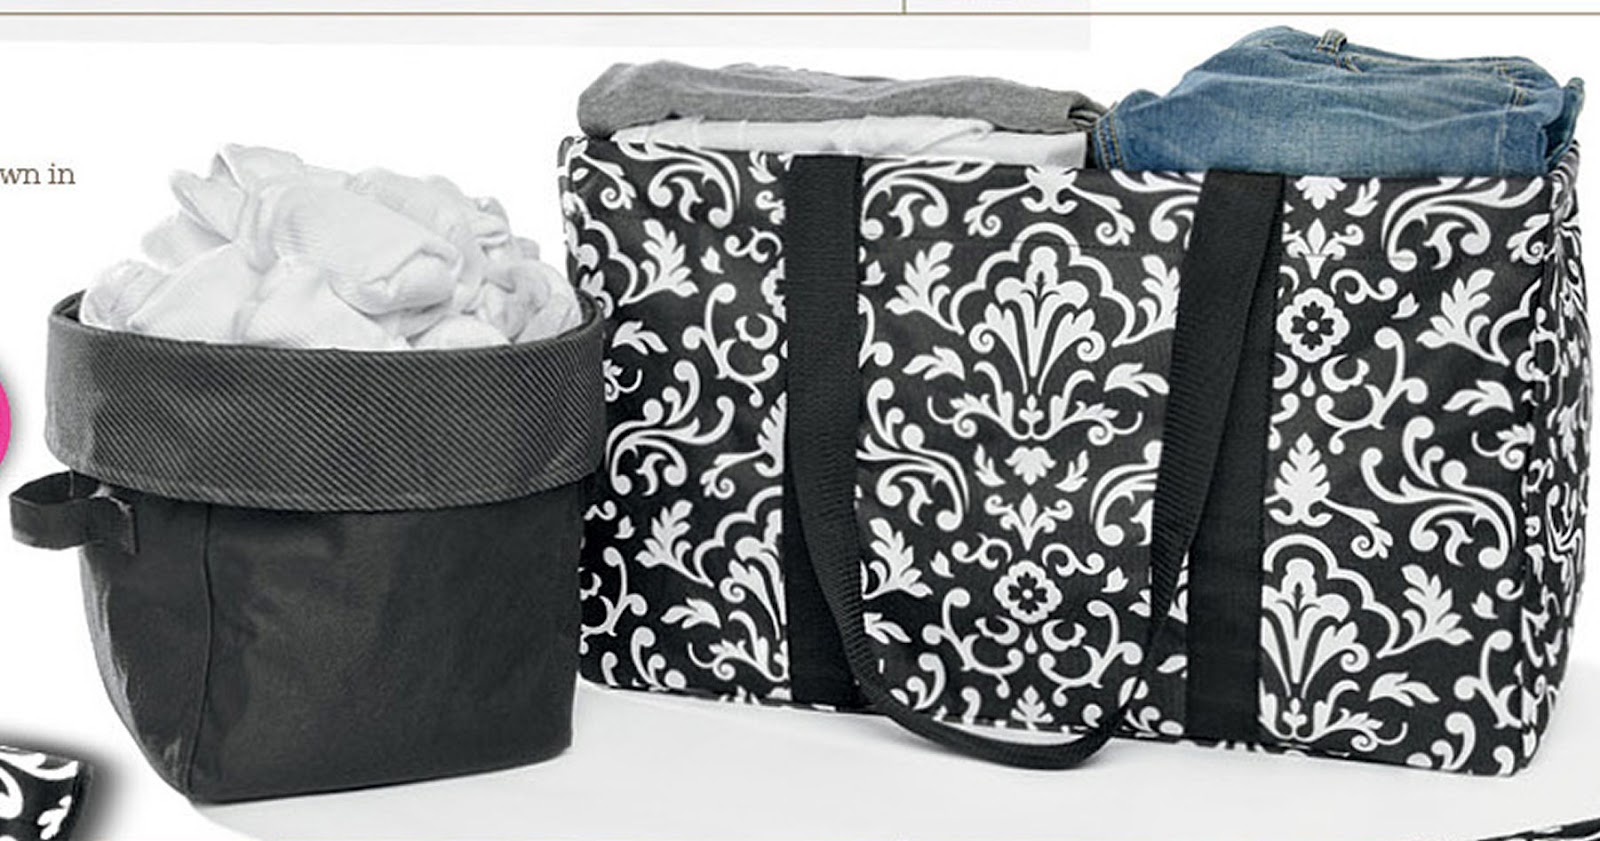 Thirty One Gifts Giveaway/Review – Jamie Cooks It Up